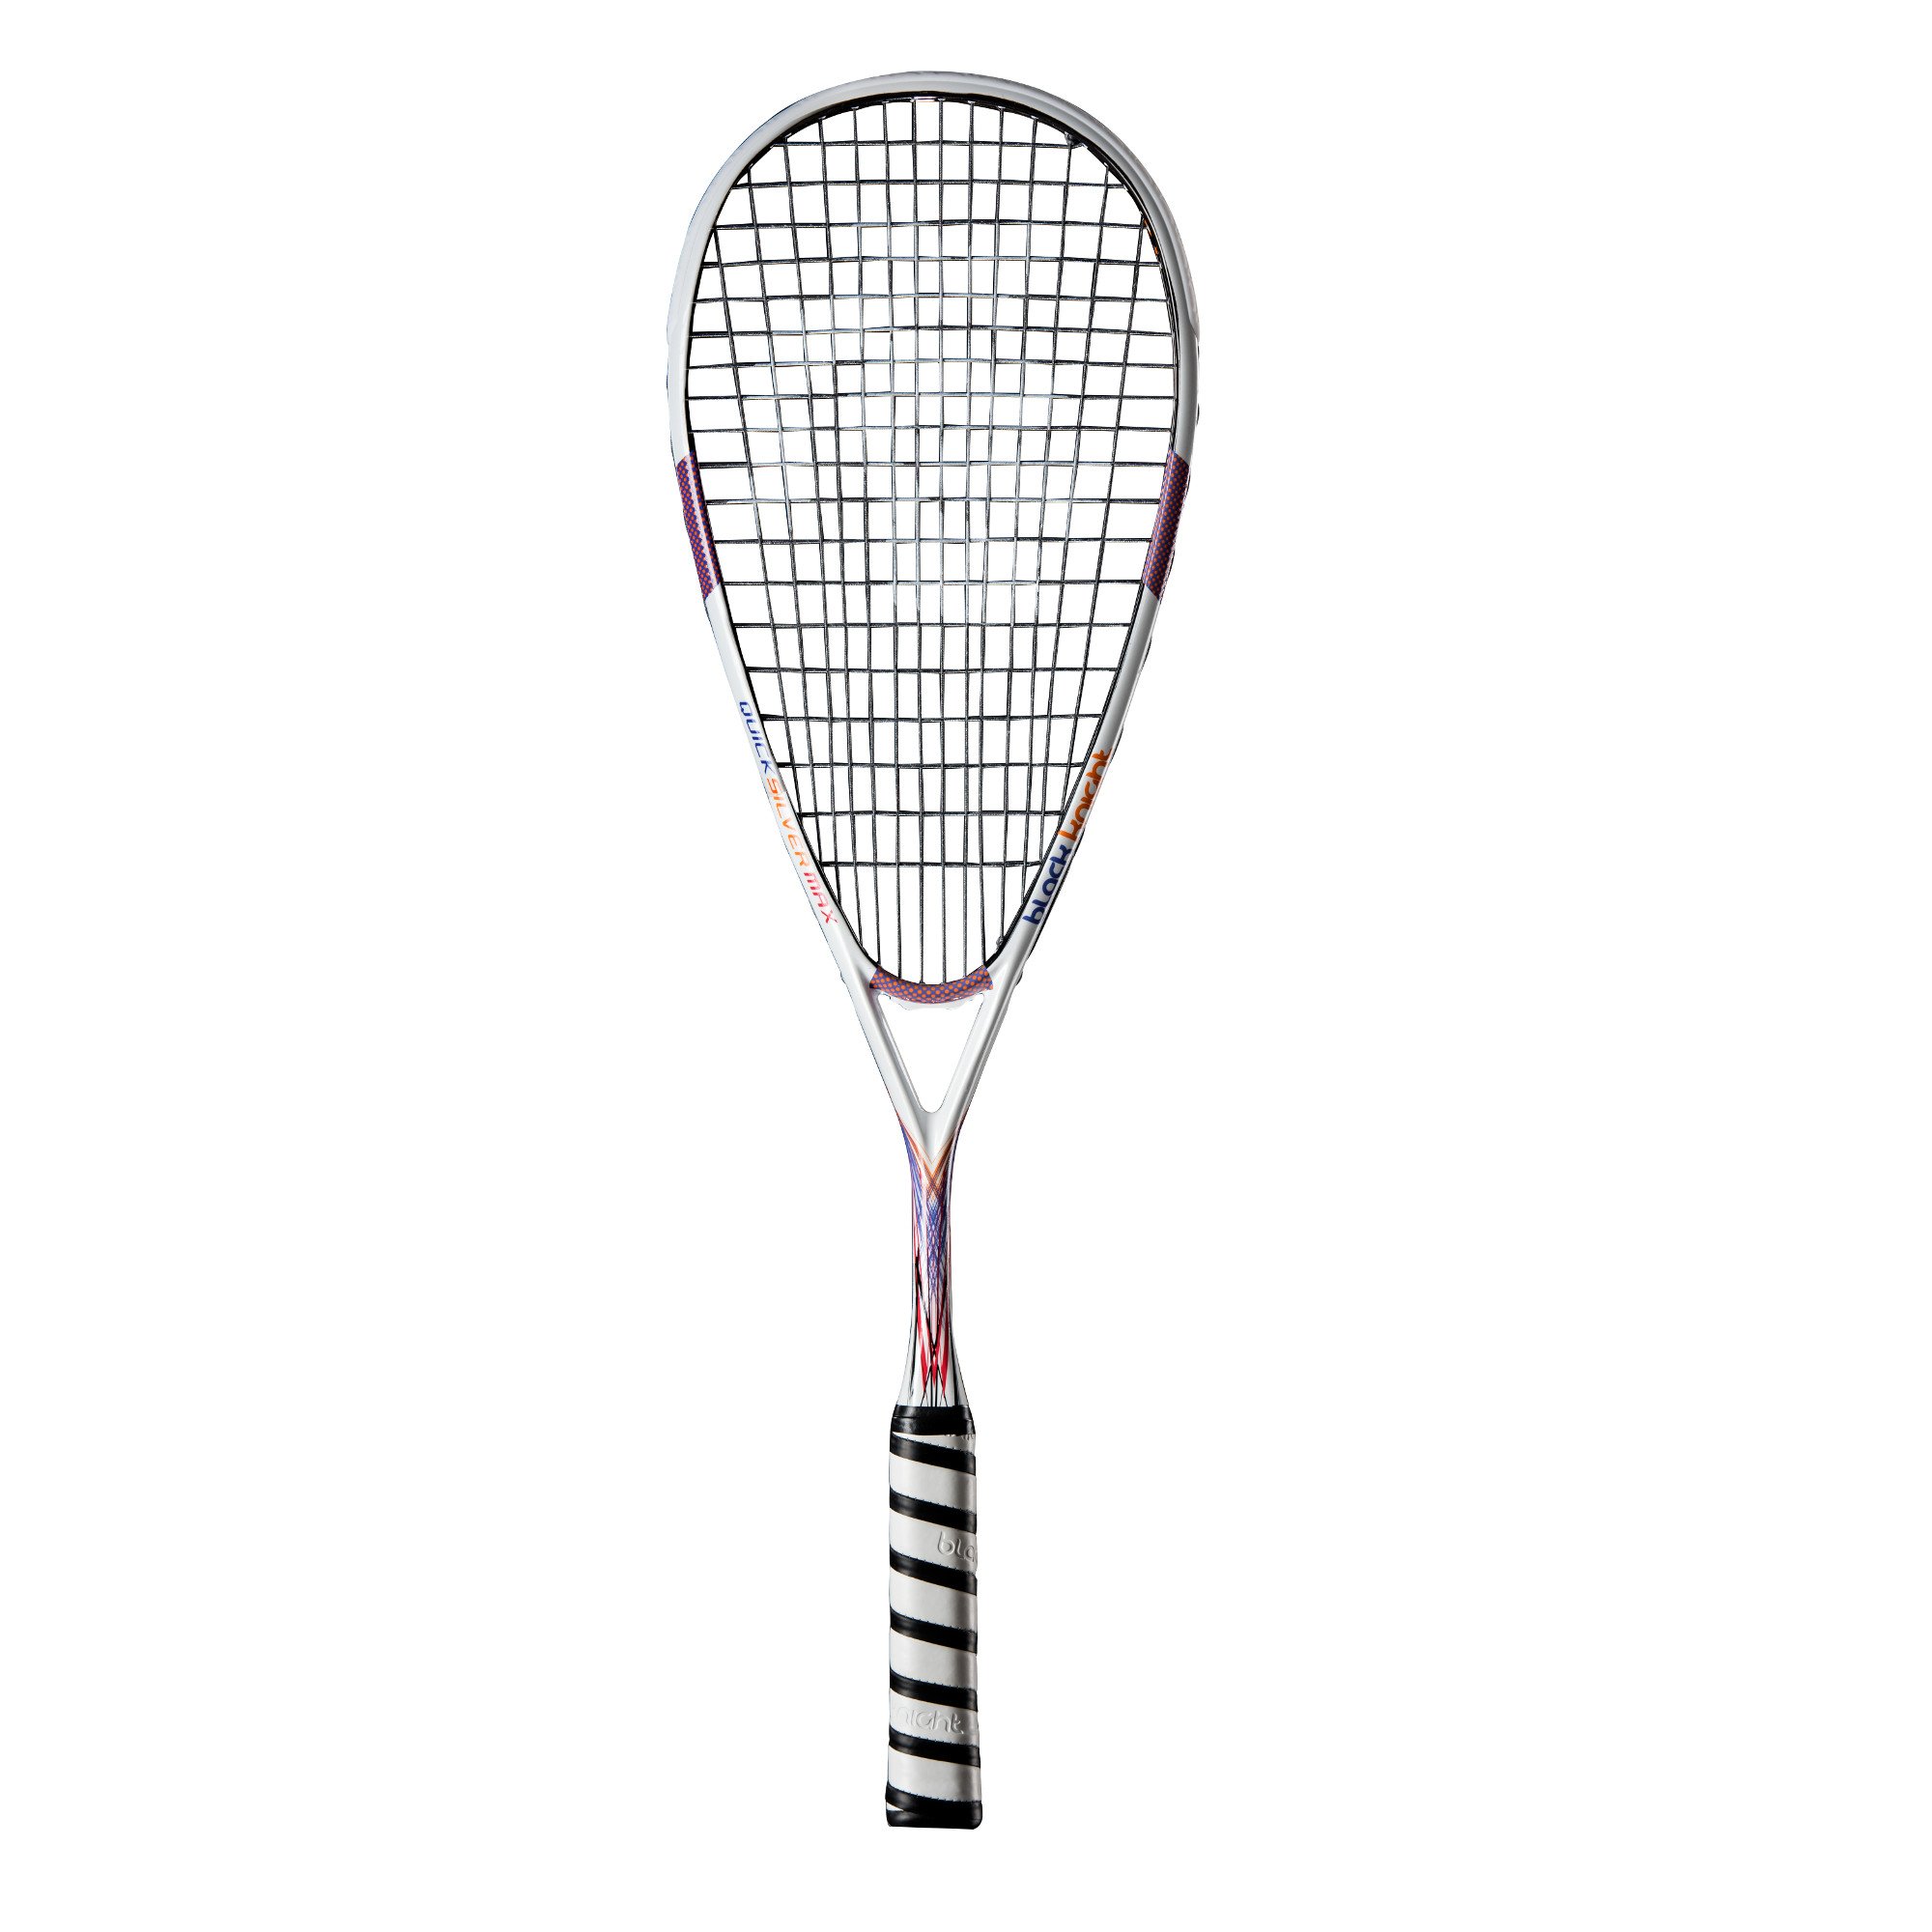 A Review of the Black Knight Element PSX Squash Racquet